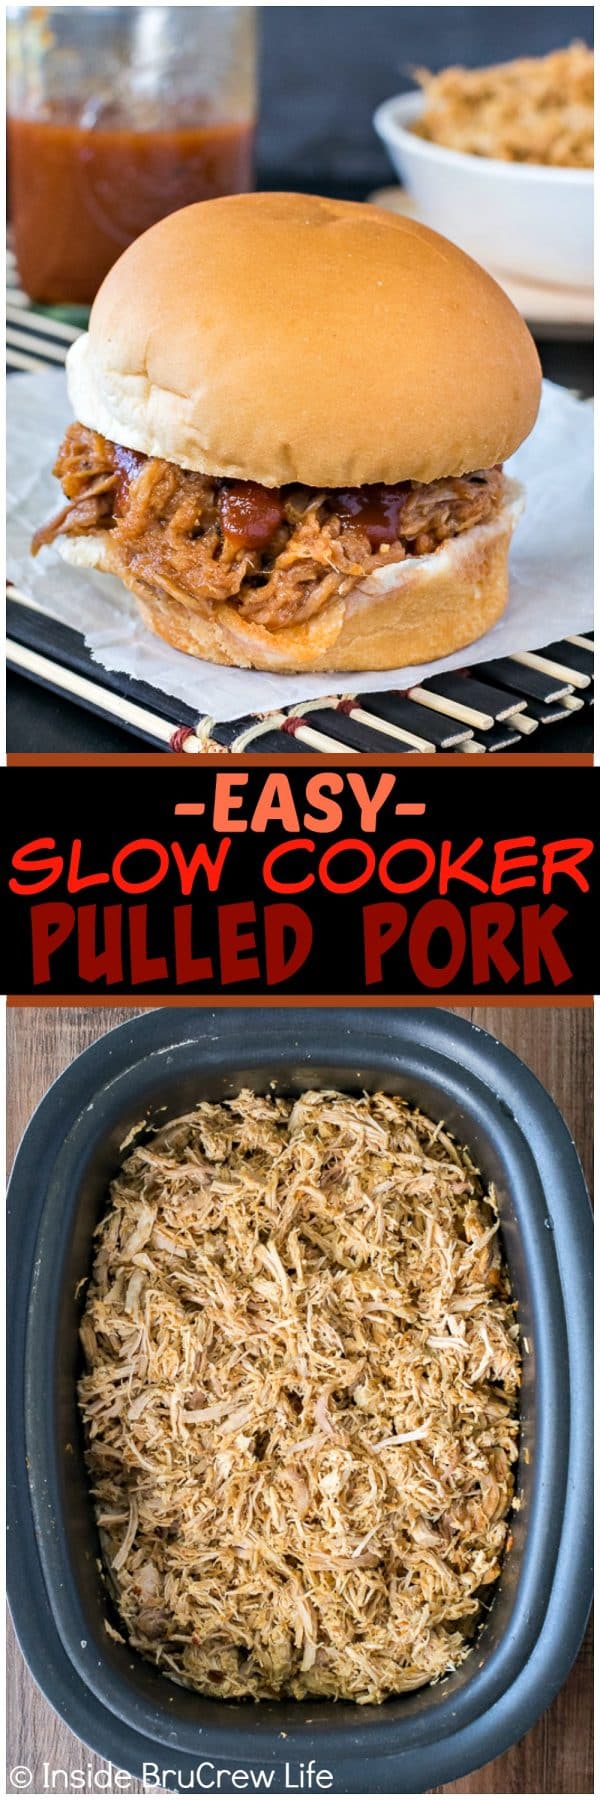 Easy Slow Cooker Pulled Pork - add a pork tenderloin rubbed with seasonings to your crock pot for a delicious summer dinner! Great recipe to have ready after a long or busy day!